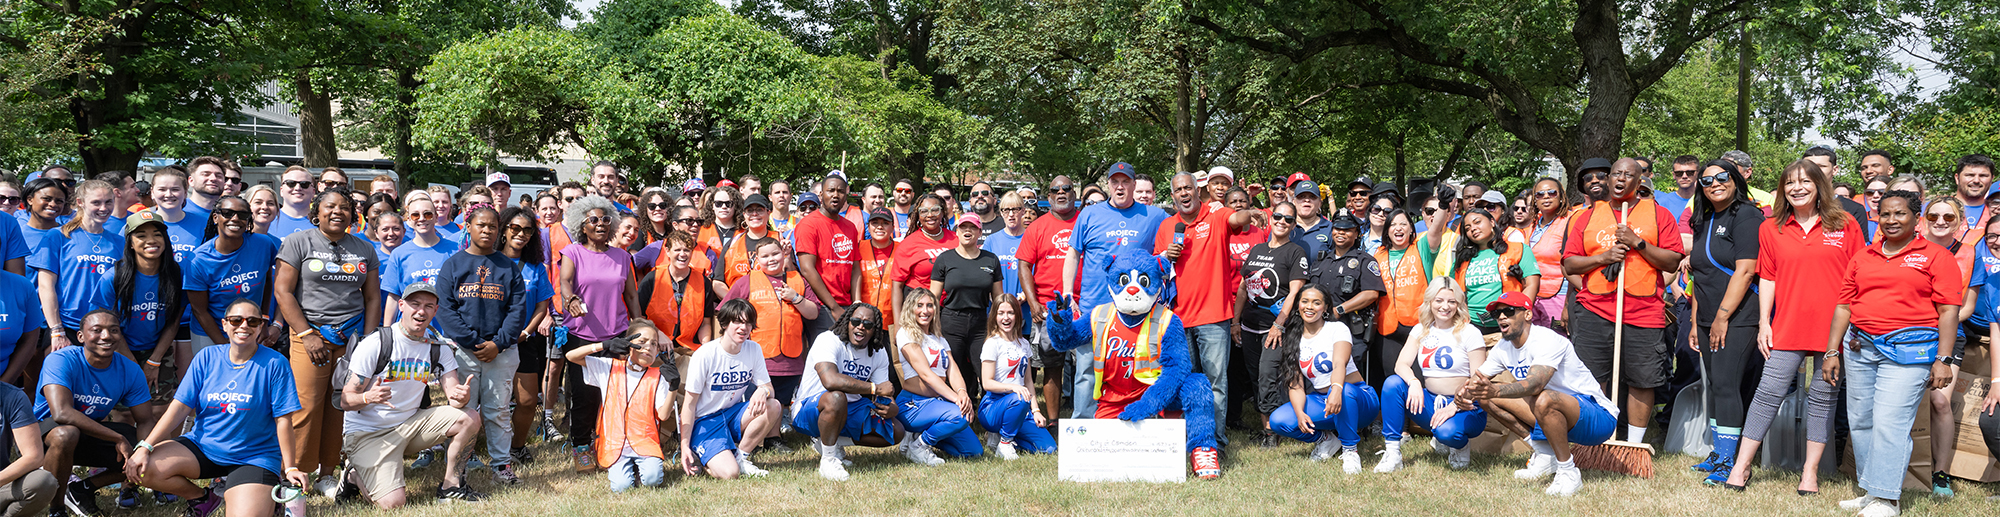 Farnham Park Clean Up With 76ers